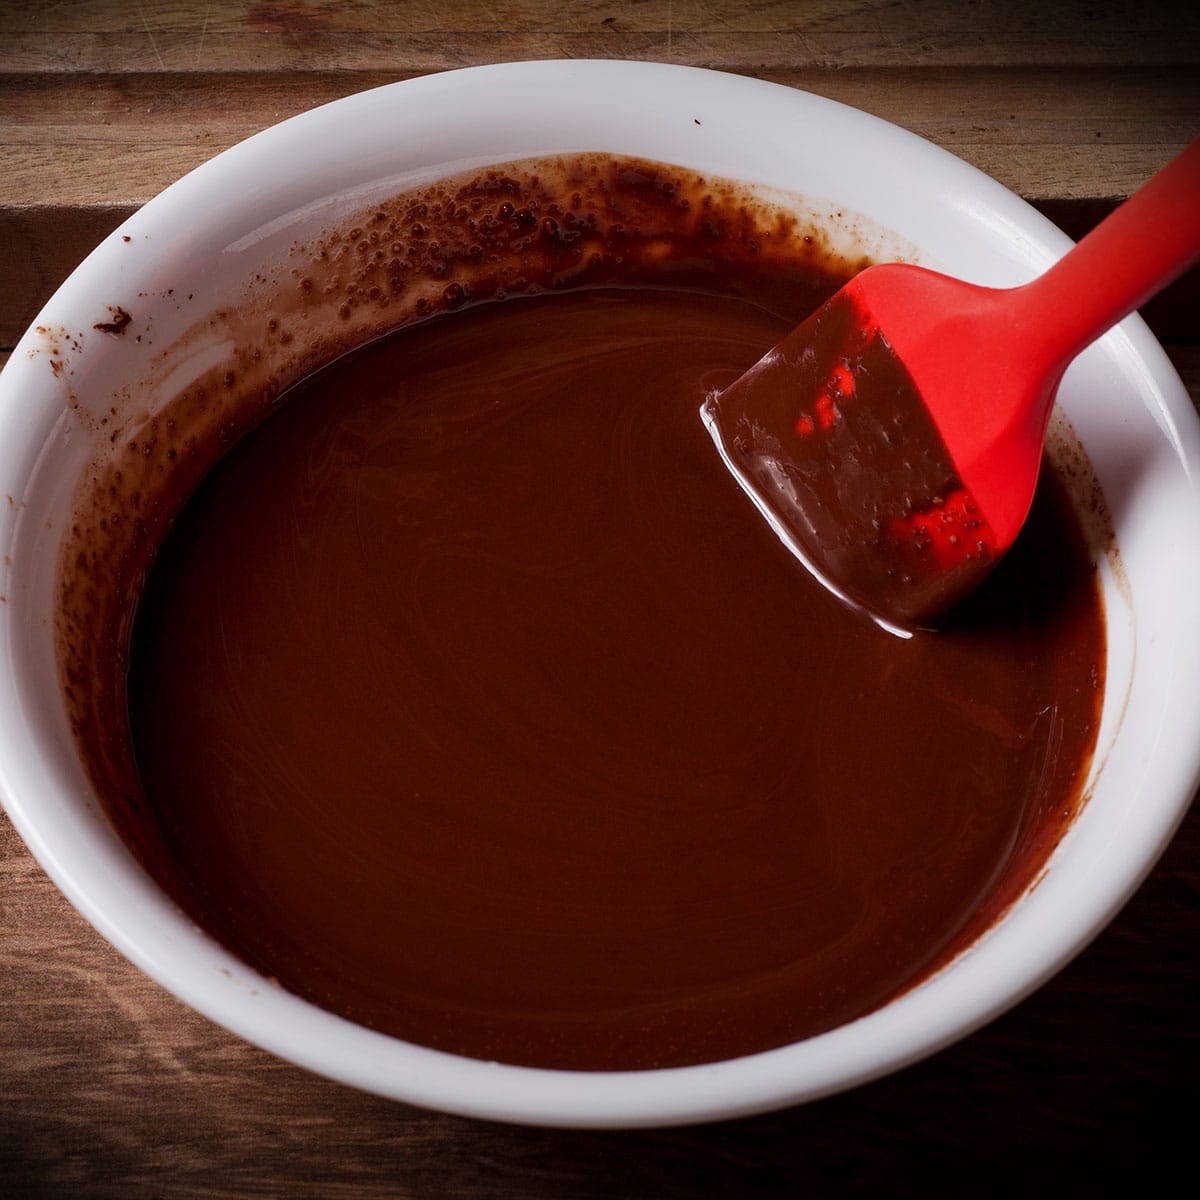 Using a red spatula to stir melted chocolate with melted butter in a white bowl.